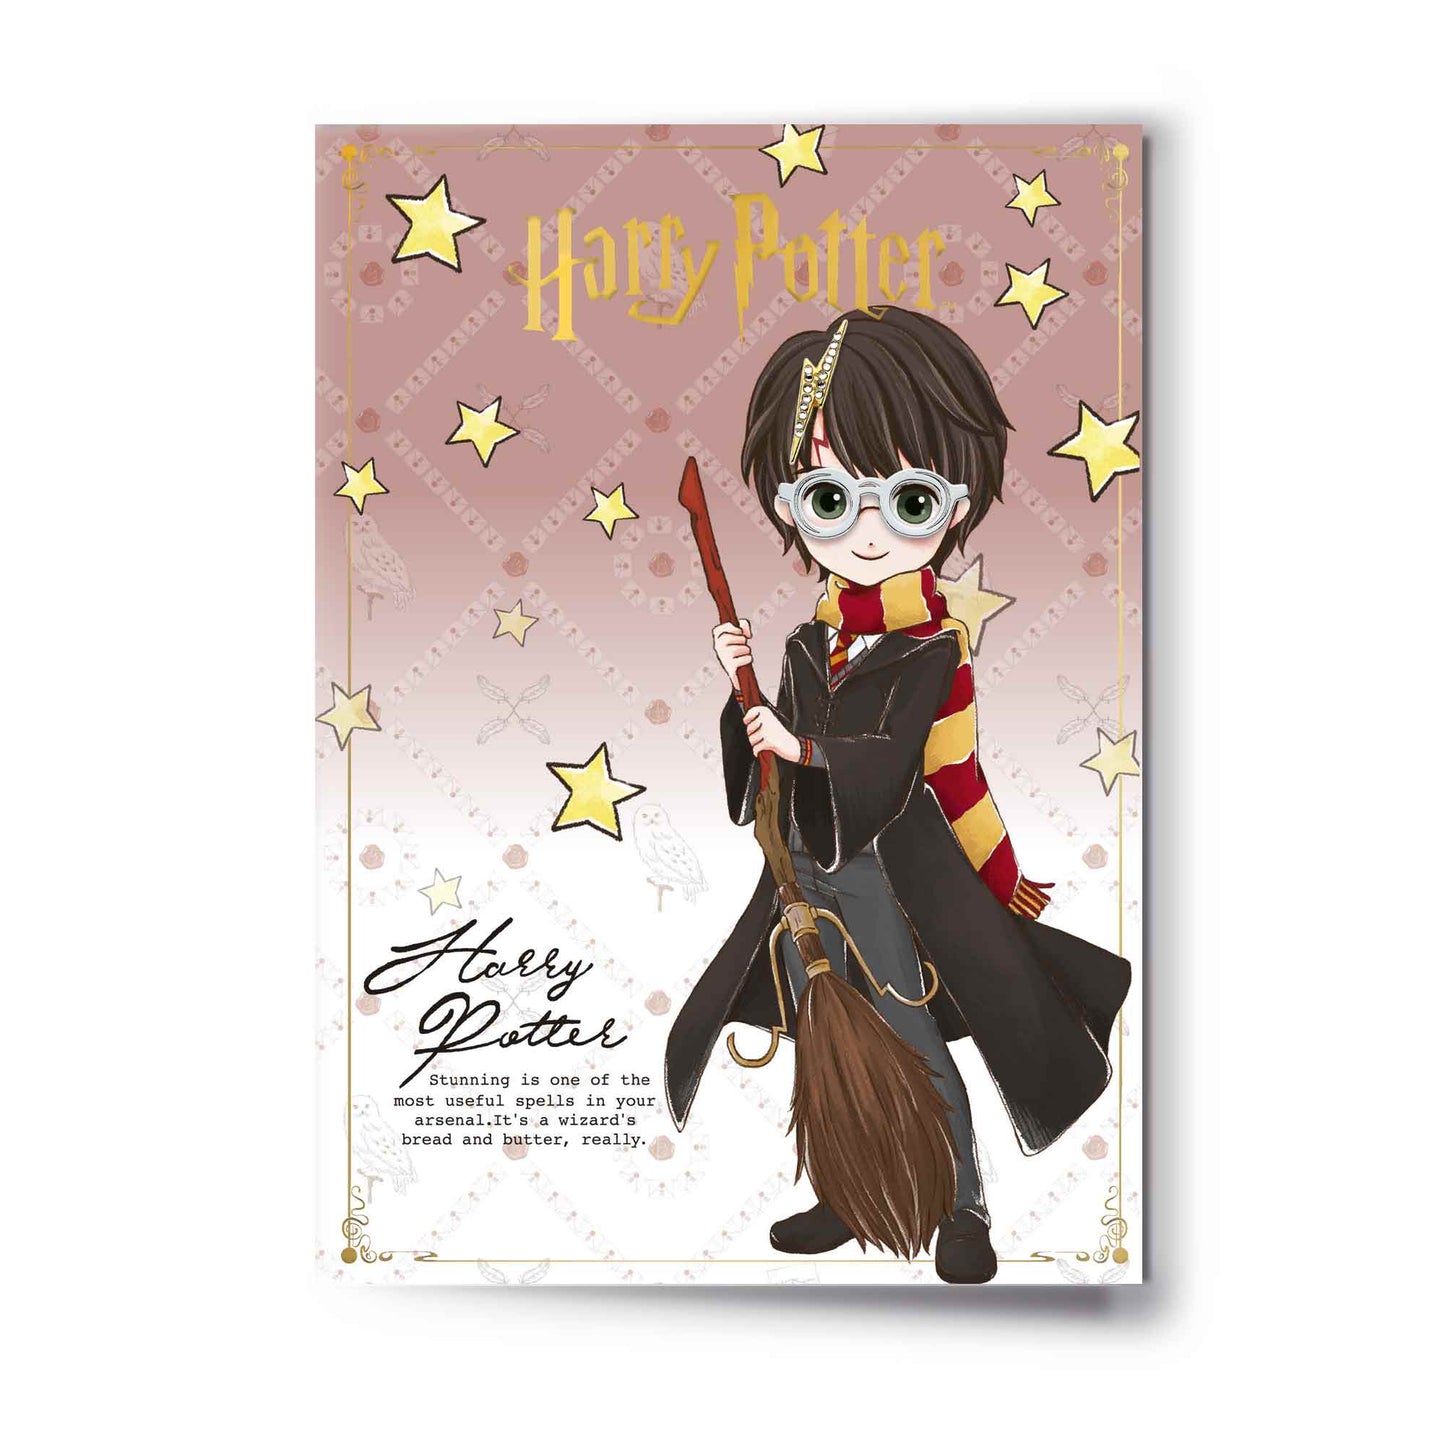 Harry Potter Character Greetings Card with Pinbadge